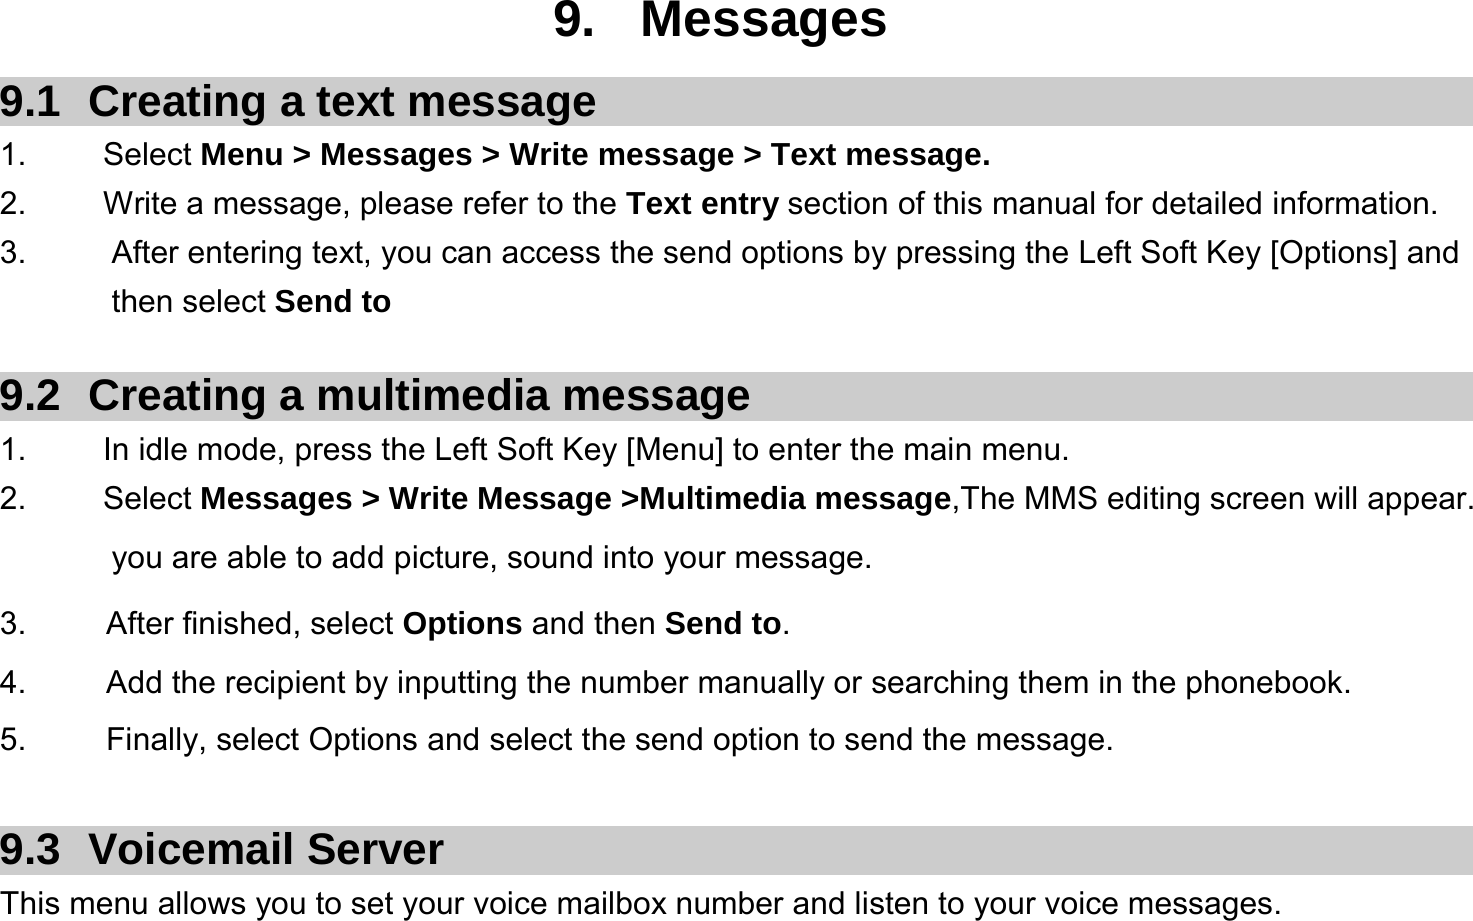  9. Messages 9.1  Creating a text message 1.   Select Menu &gt; Messages &gt; Write message &gt; Text message. 2.    Write a message, please refer to the Text entry section of this manual for detailed information. 3.  After entering text, you can access the send options by pressing the Left Soft Key [Options] and then select Send to  9.2  Creating a multimedia message 1.  In idle mode, press the Left Soft Key [Menu] to enter the main menu. 2.   Select Messages &gt; Write Message &gt;Multimedia message,The MMS editing screen will appear. you are able to add picture, sound into your message.   3.     After finished, select Options and then Send to. 4.     Add the recipient by inputting the number manually or searching them in the phonebook. 5.     Finally, select Options and select the send option to send the message.  9.3 Voicemail Server This menu allows you to set your voice mailbox number and listen to your voice messages. 